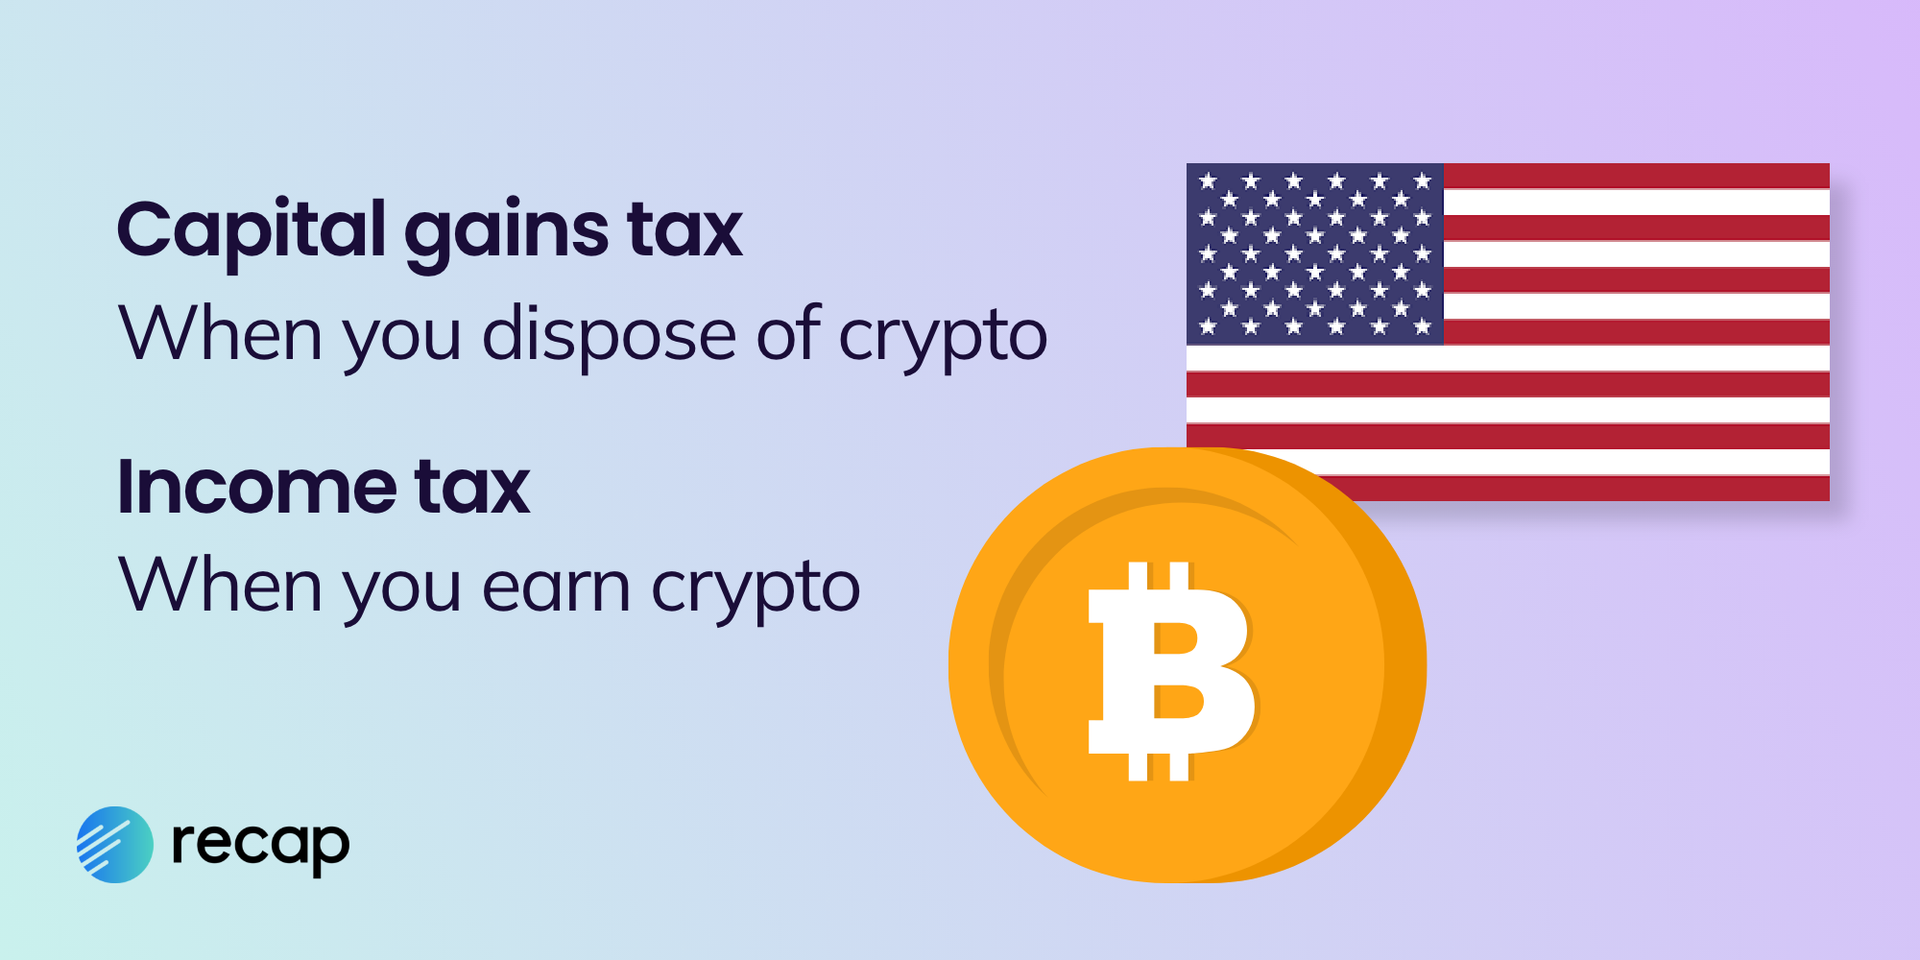 Infographic stating that in the US capital gains tax applies when you dispose of crypto and income tax when you earn crypto 